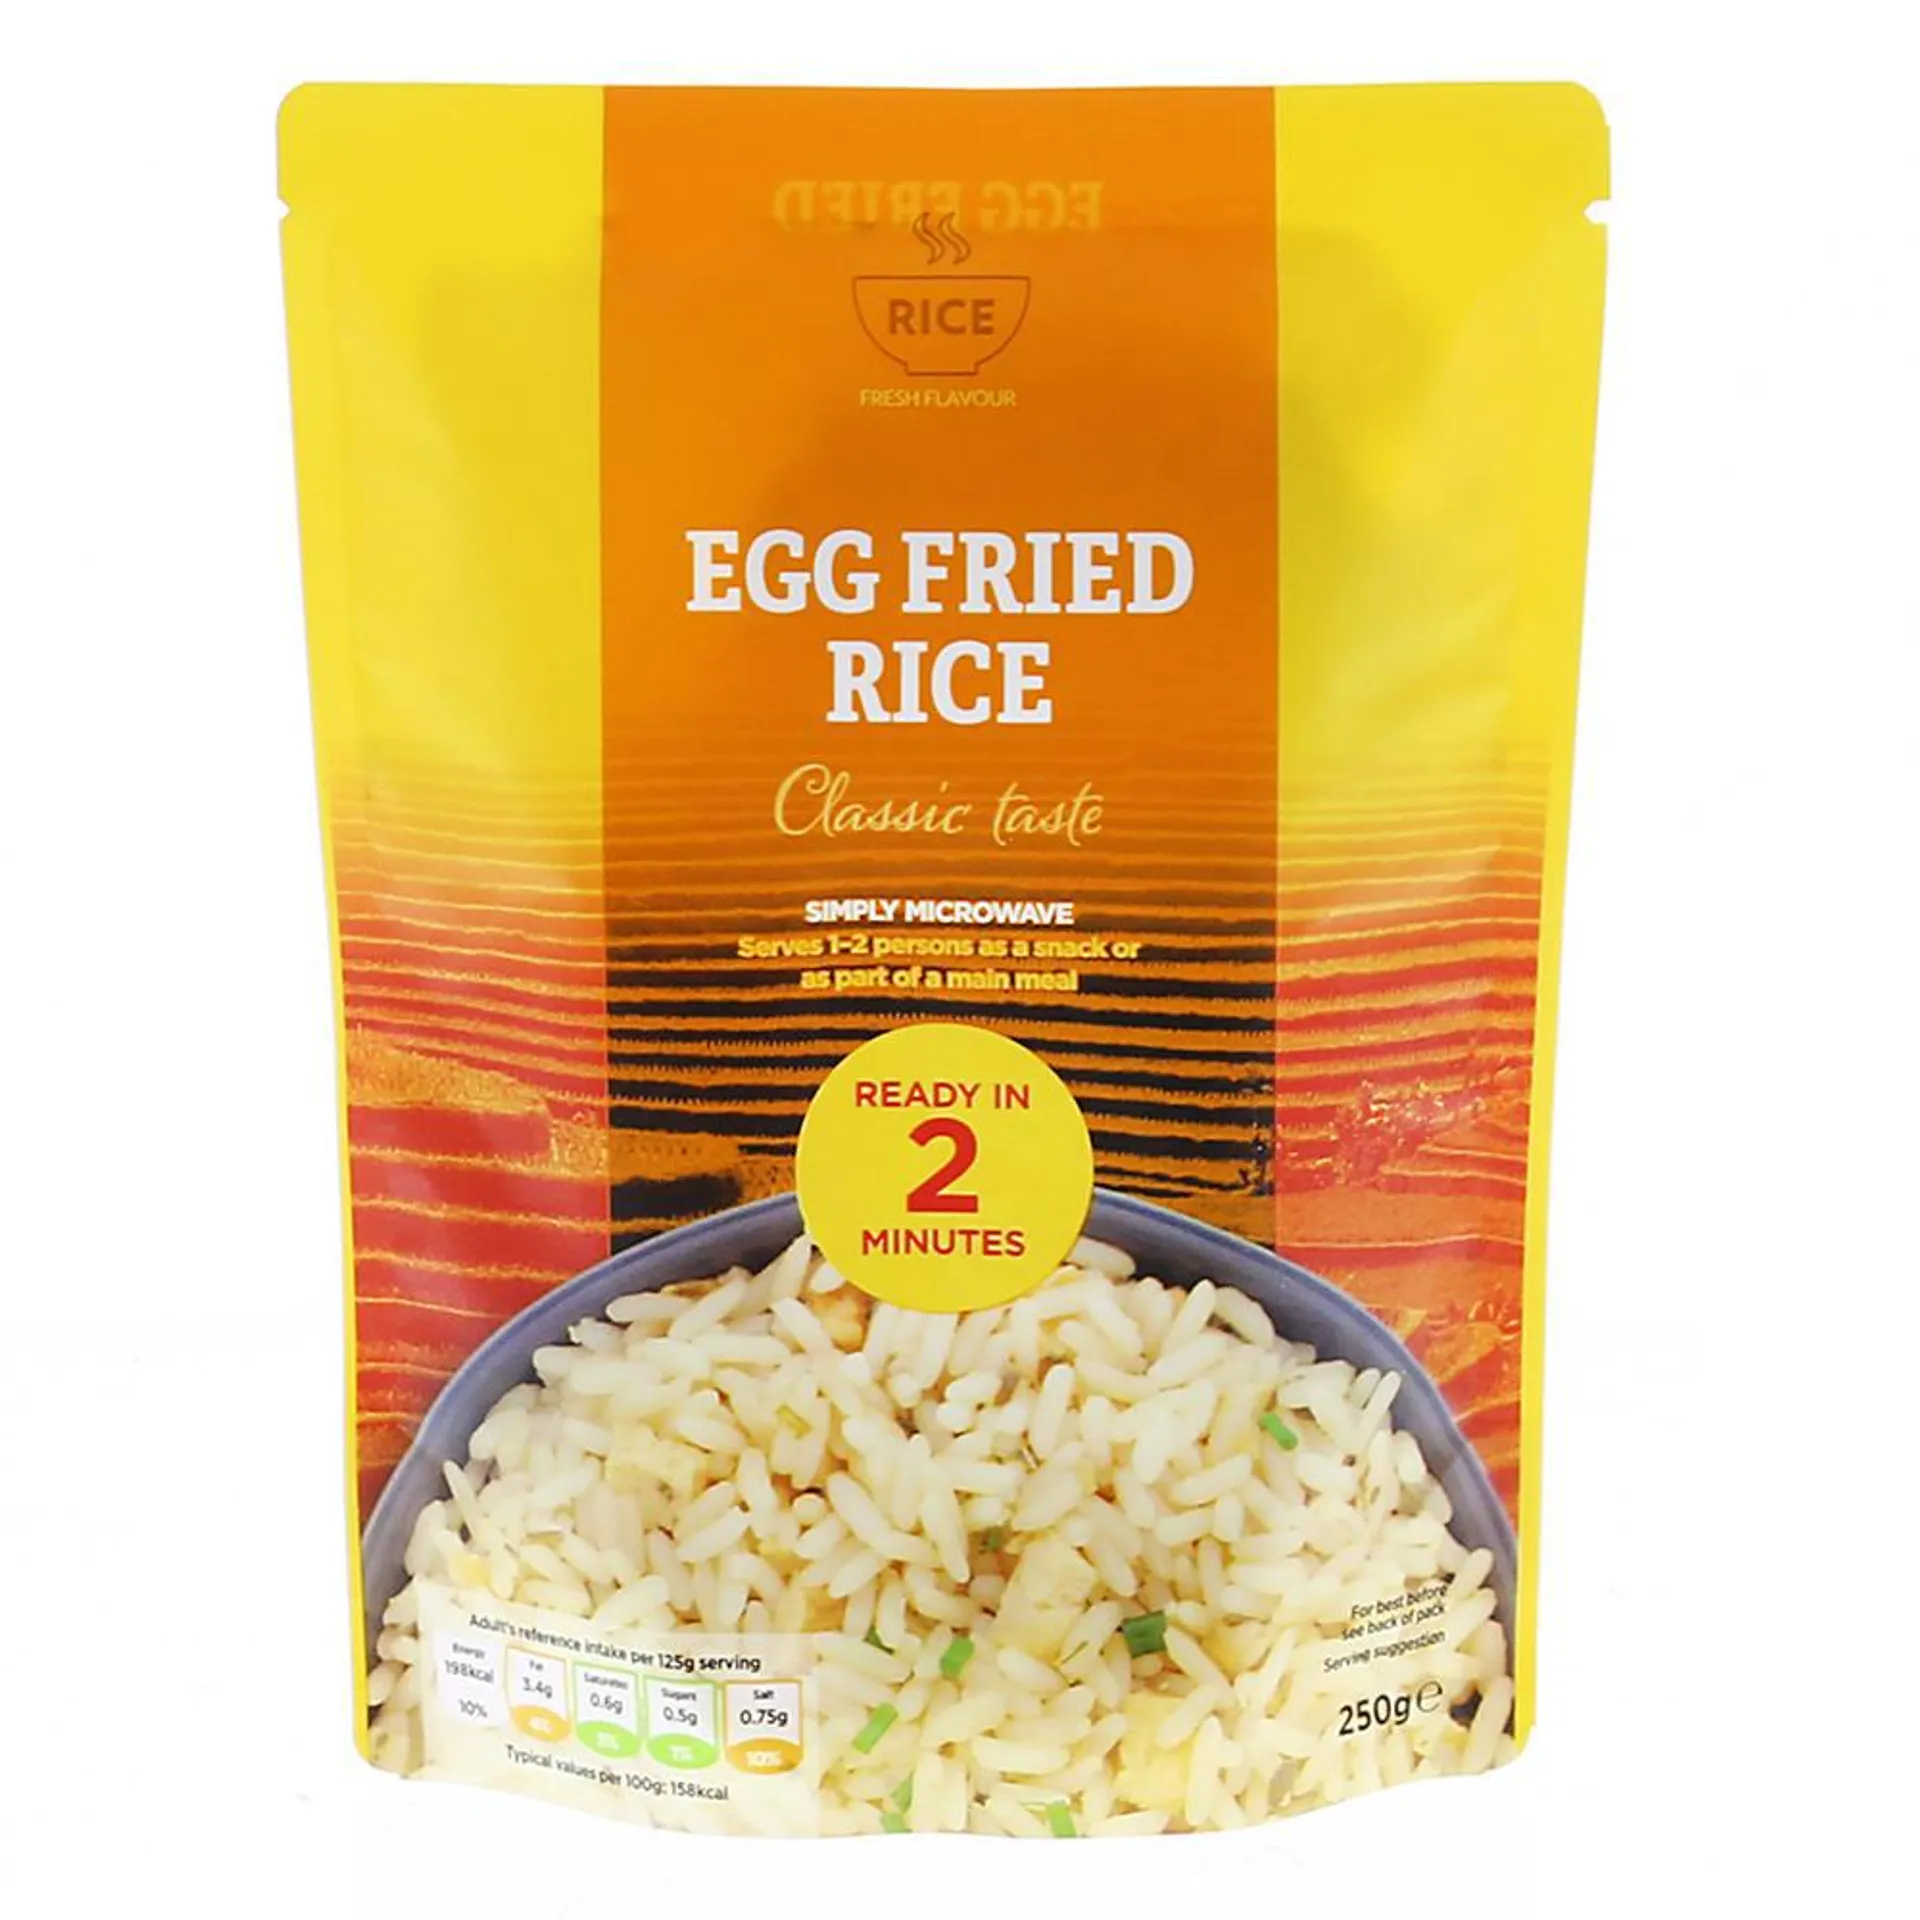 Rice: Egg Fried Rice Microwavable Packet 250g (Case of 12)